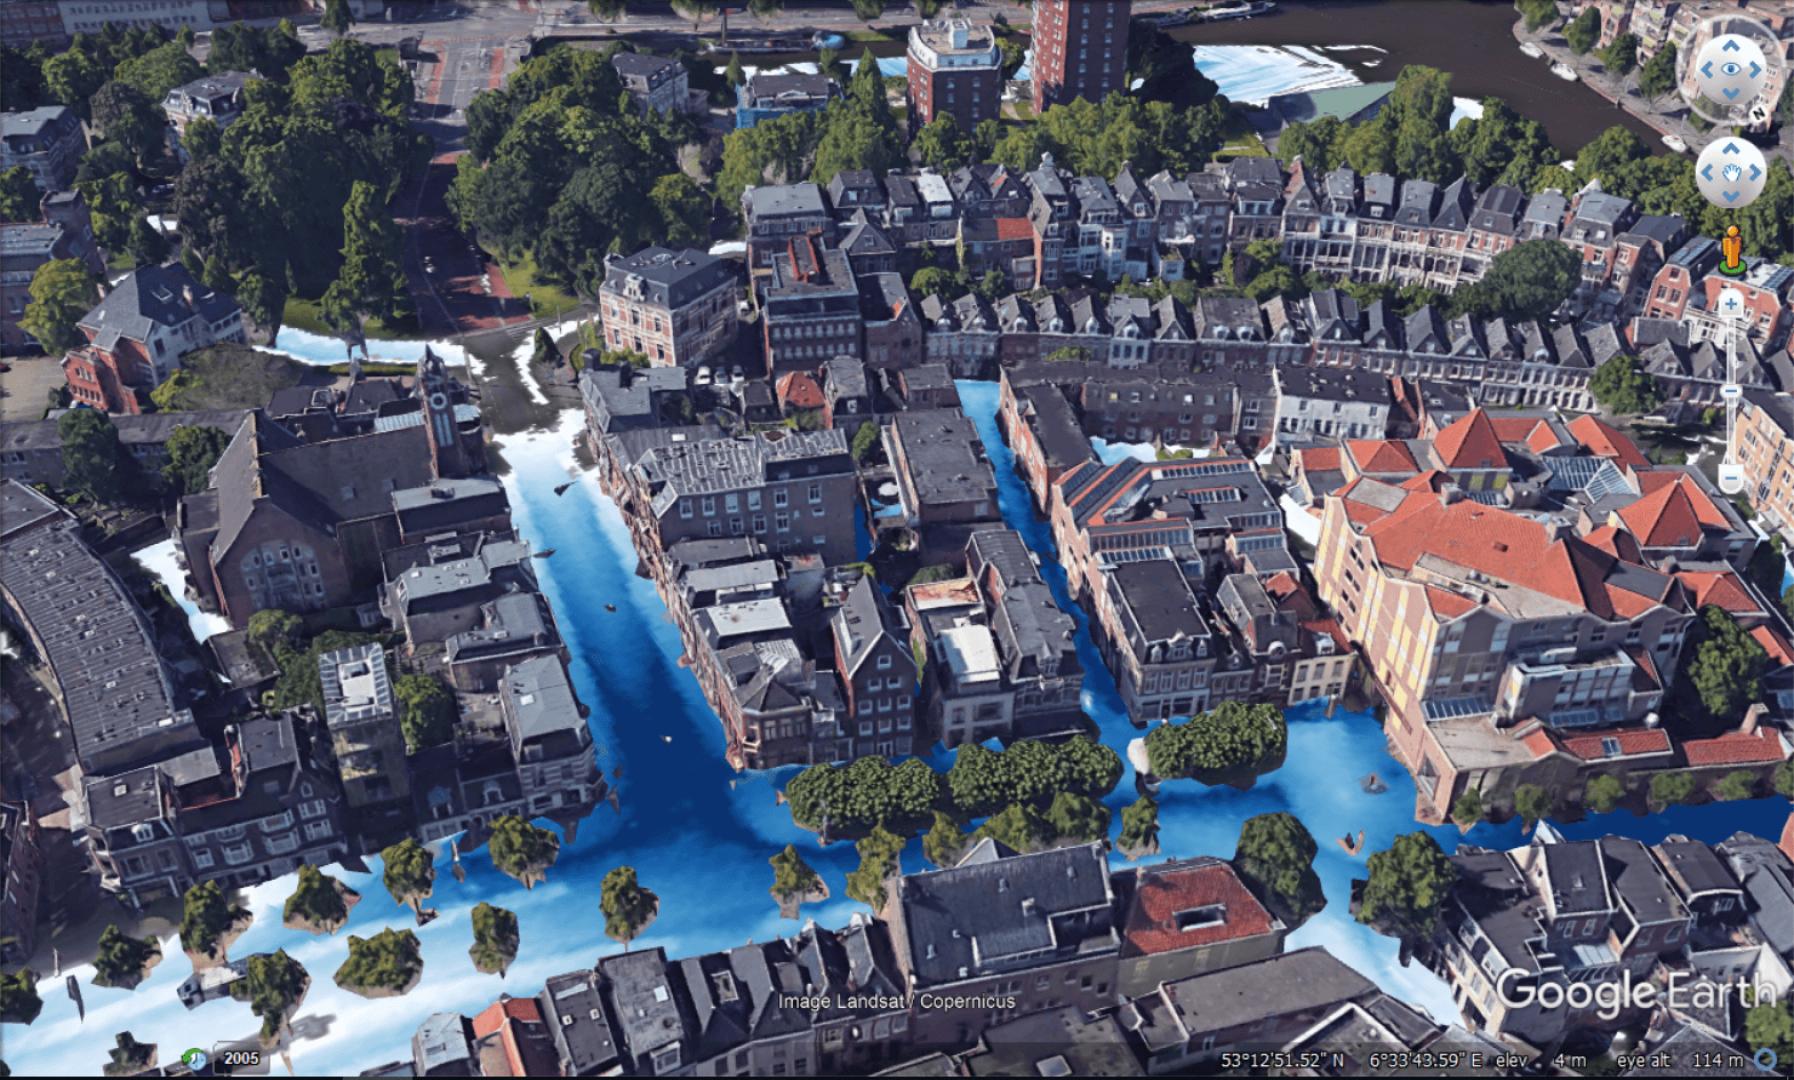 Detailed (small scale) city flood models 